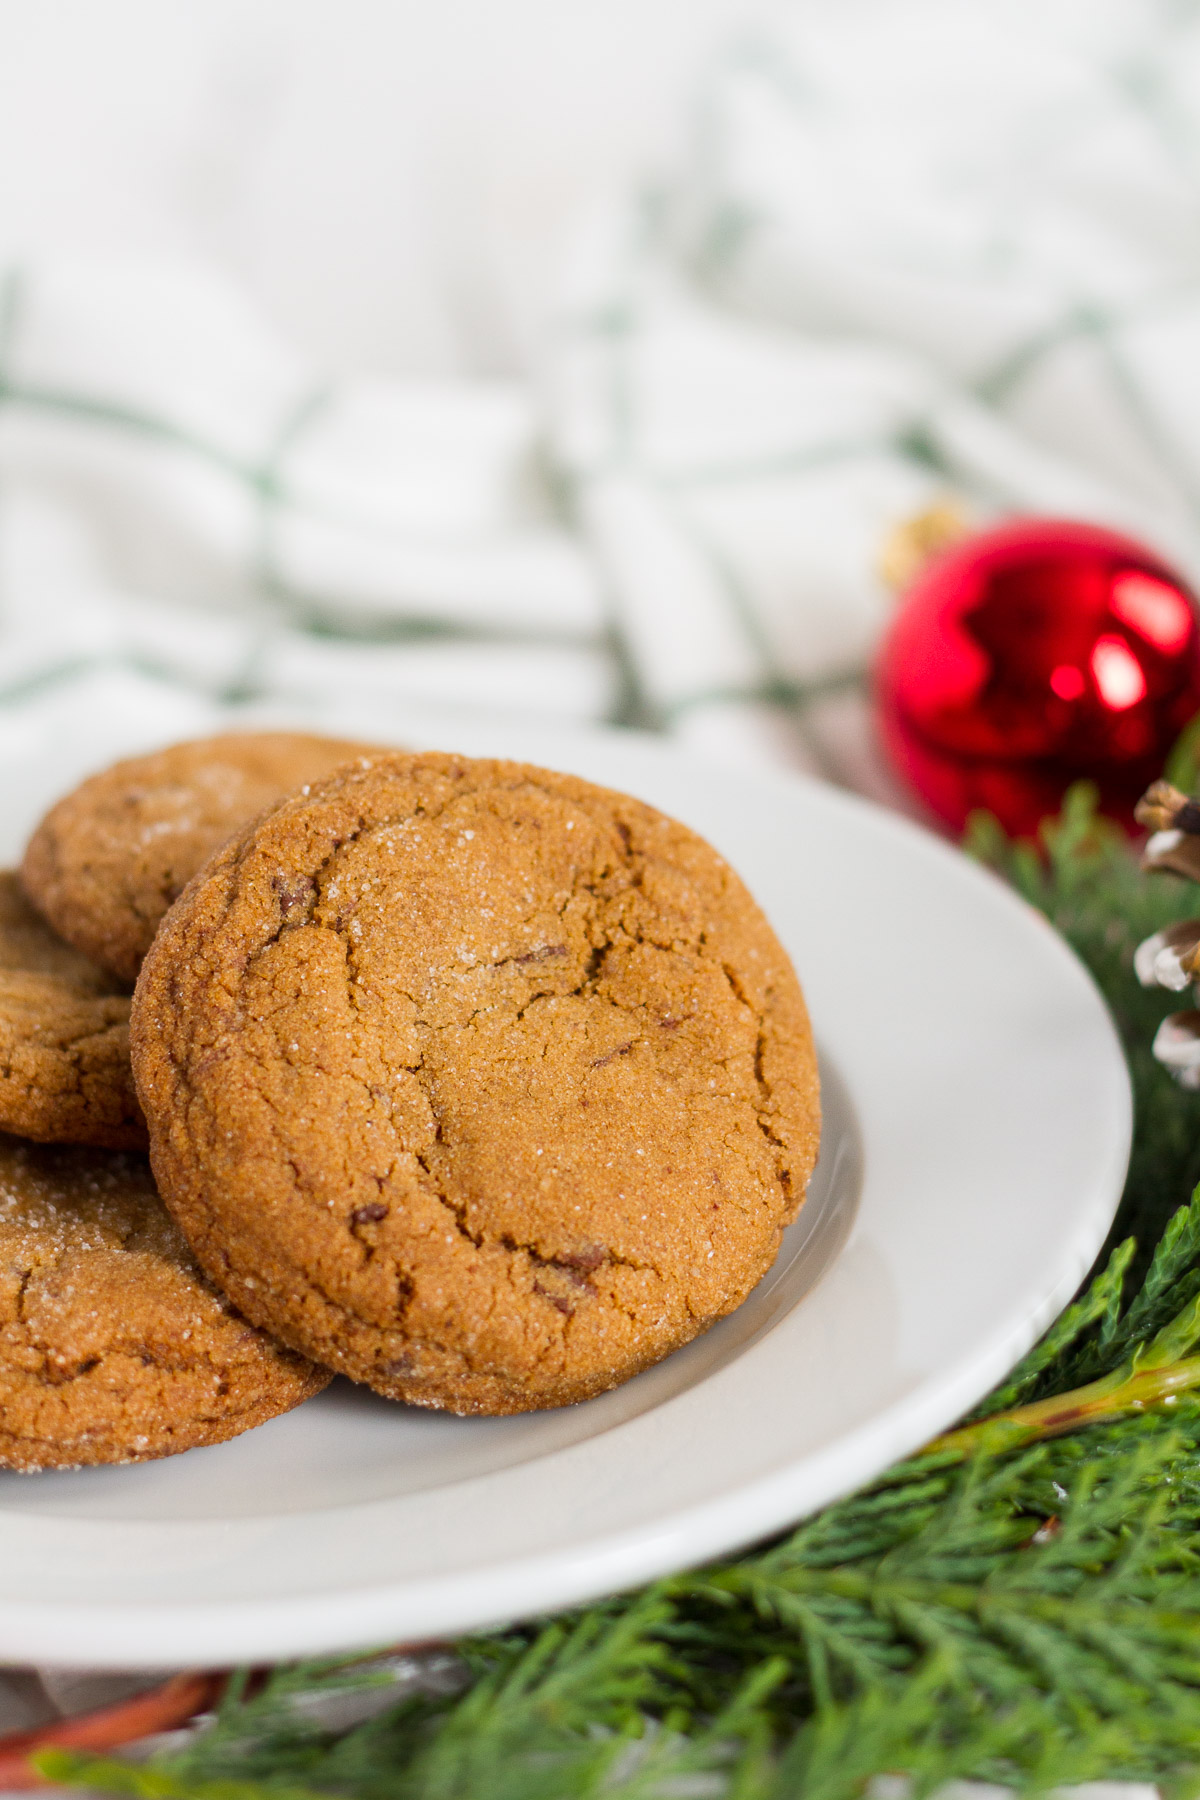 These chocolate chunk ginger cookies are perfect for the holidays!